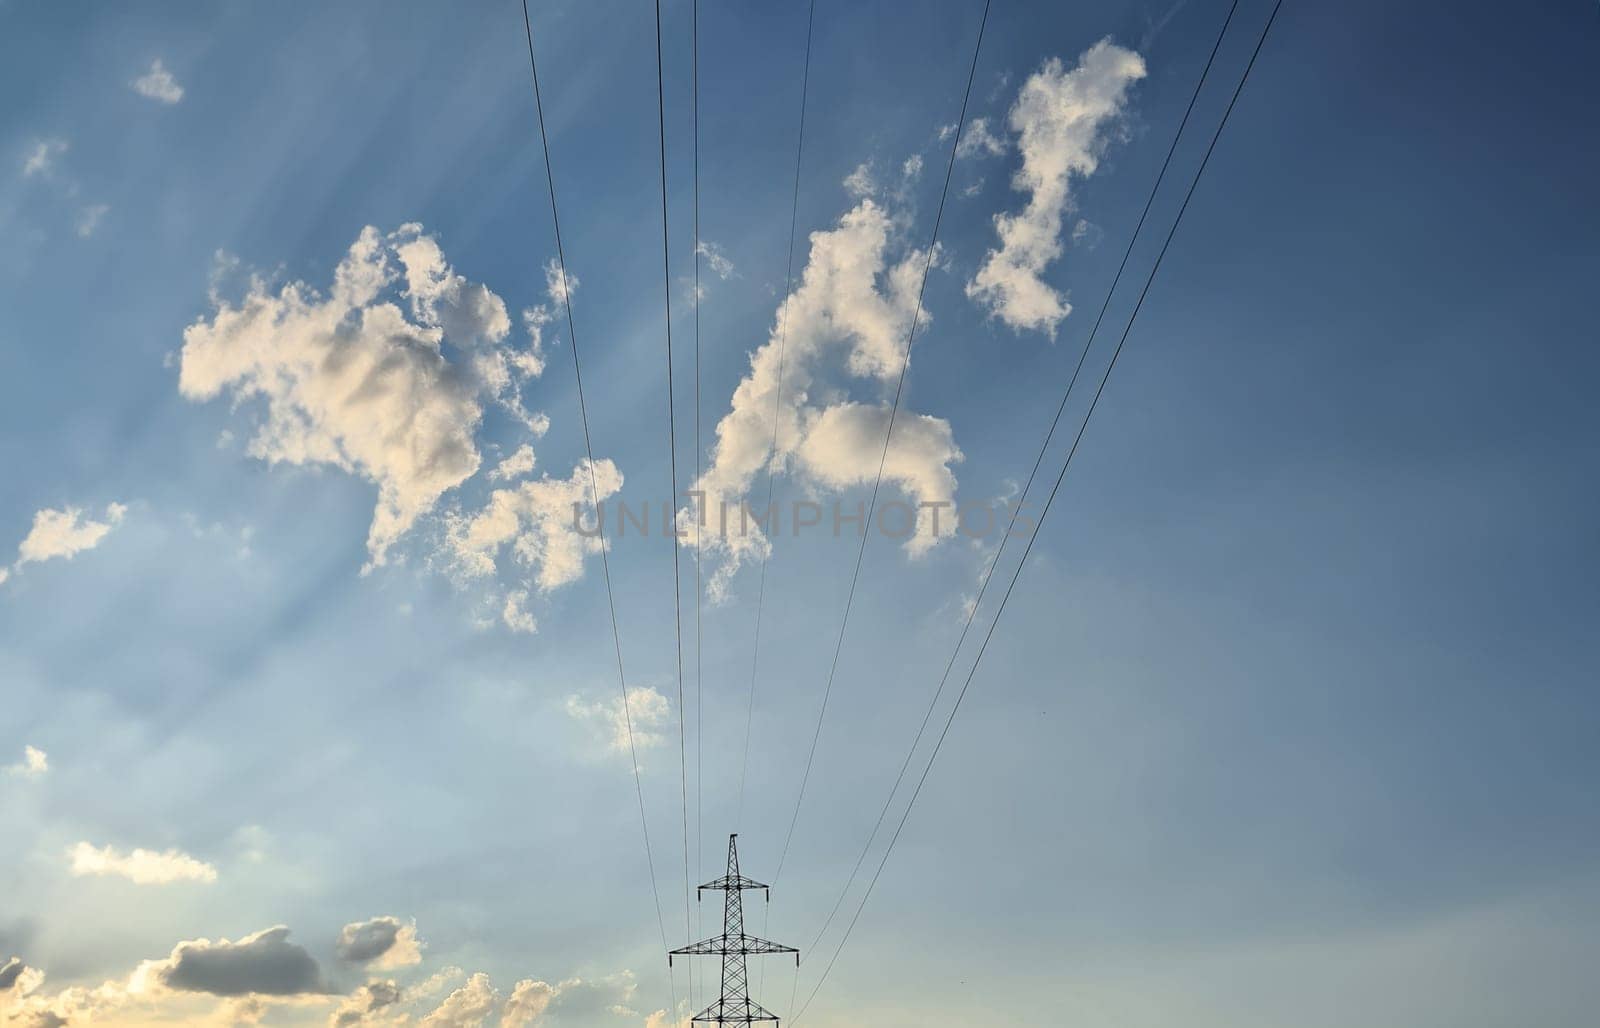 Electric wires from power lines on background of blue sky with clouds by kuprevich